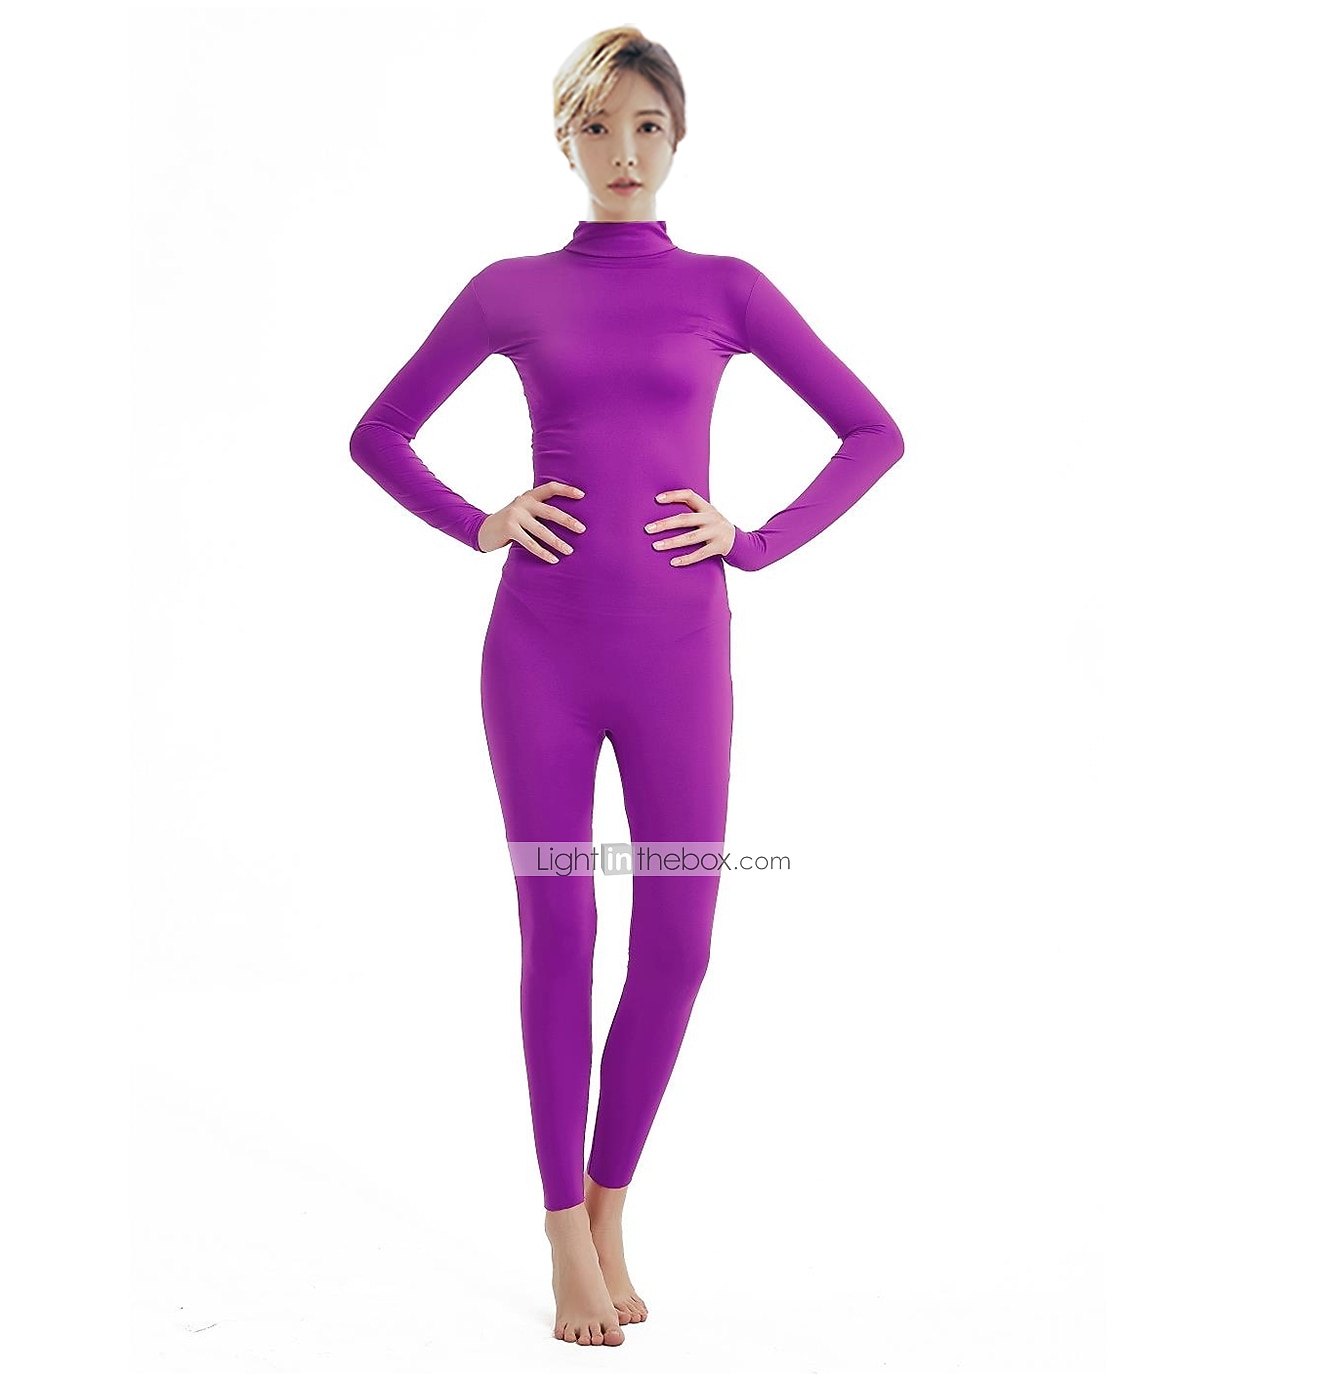 Women Solid Color Full Bodysuit Costume Skin Suit Adults Catsuit Cosplay  Costume Outfit